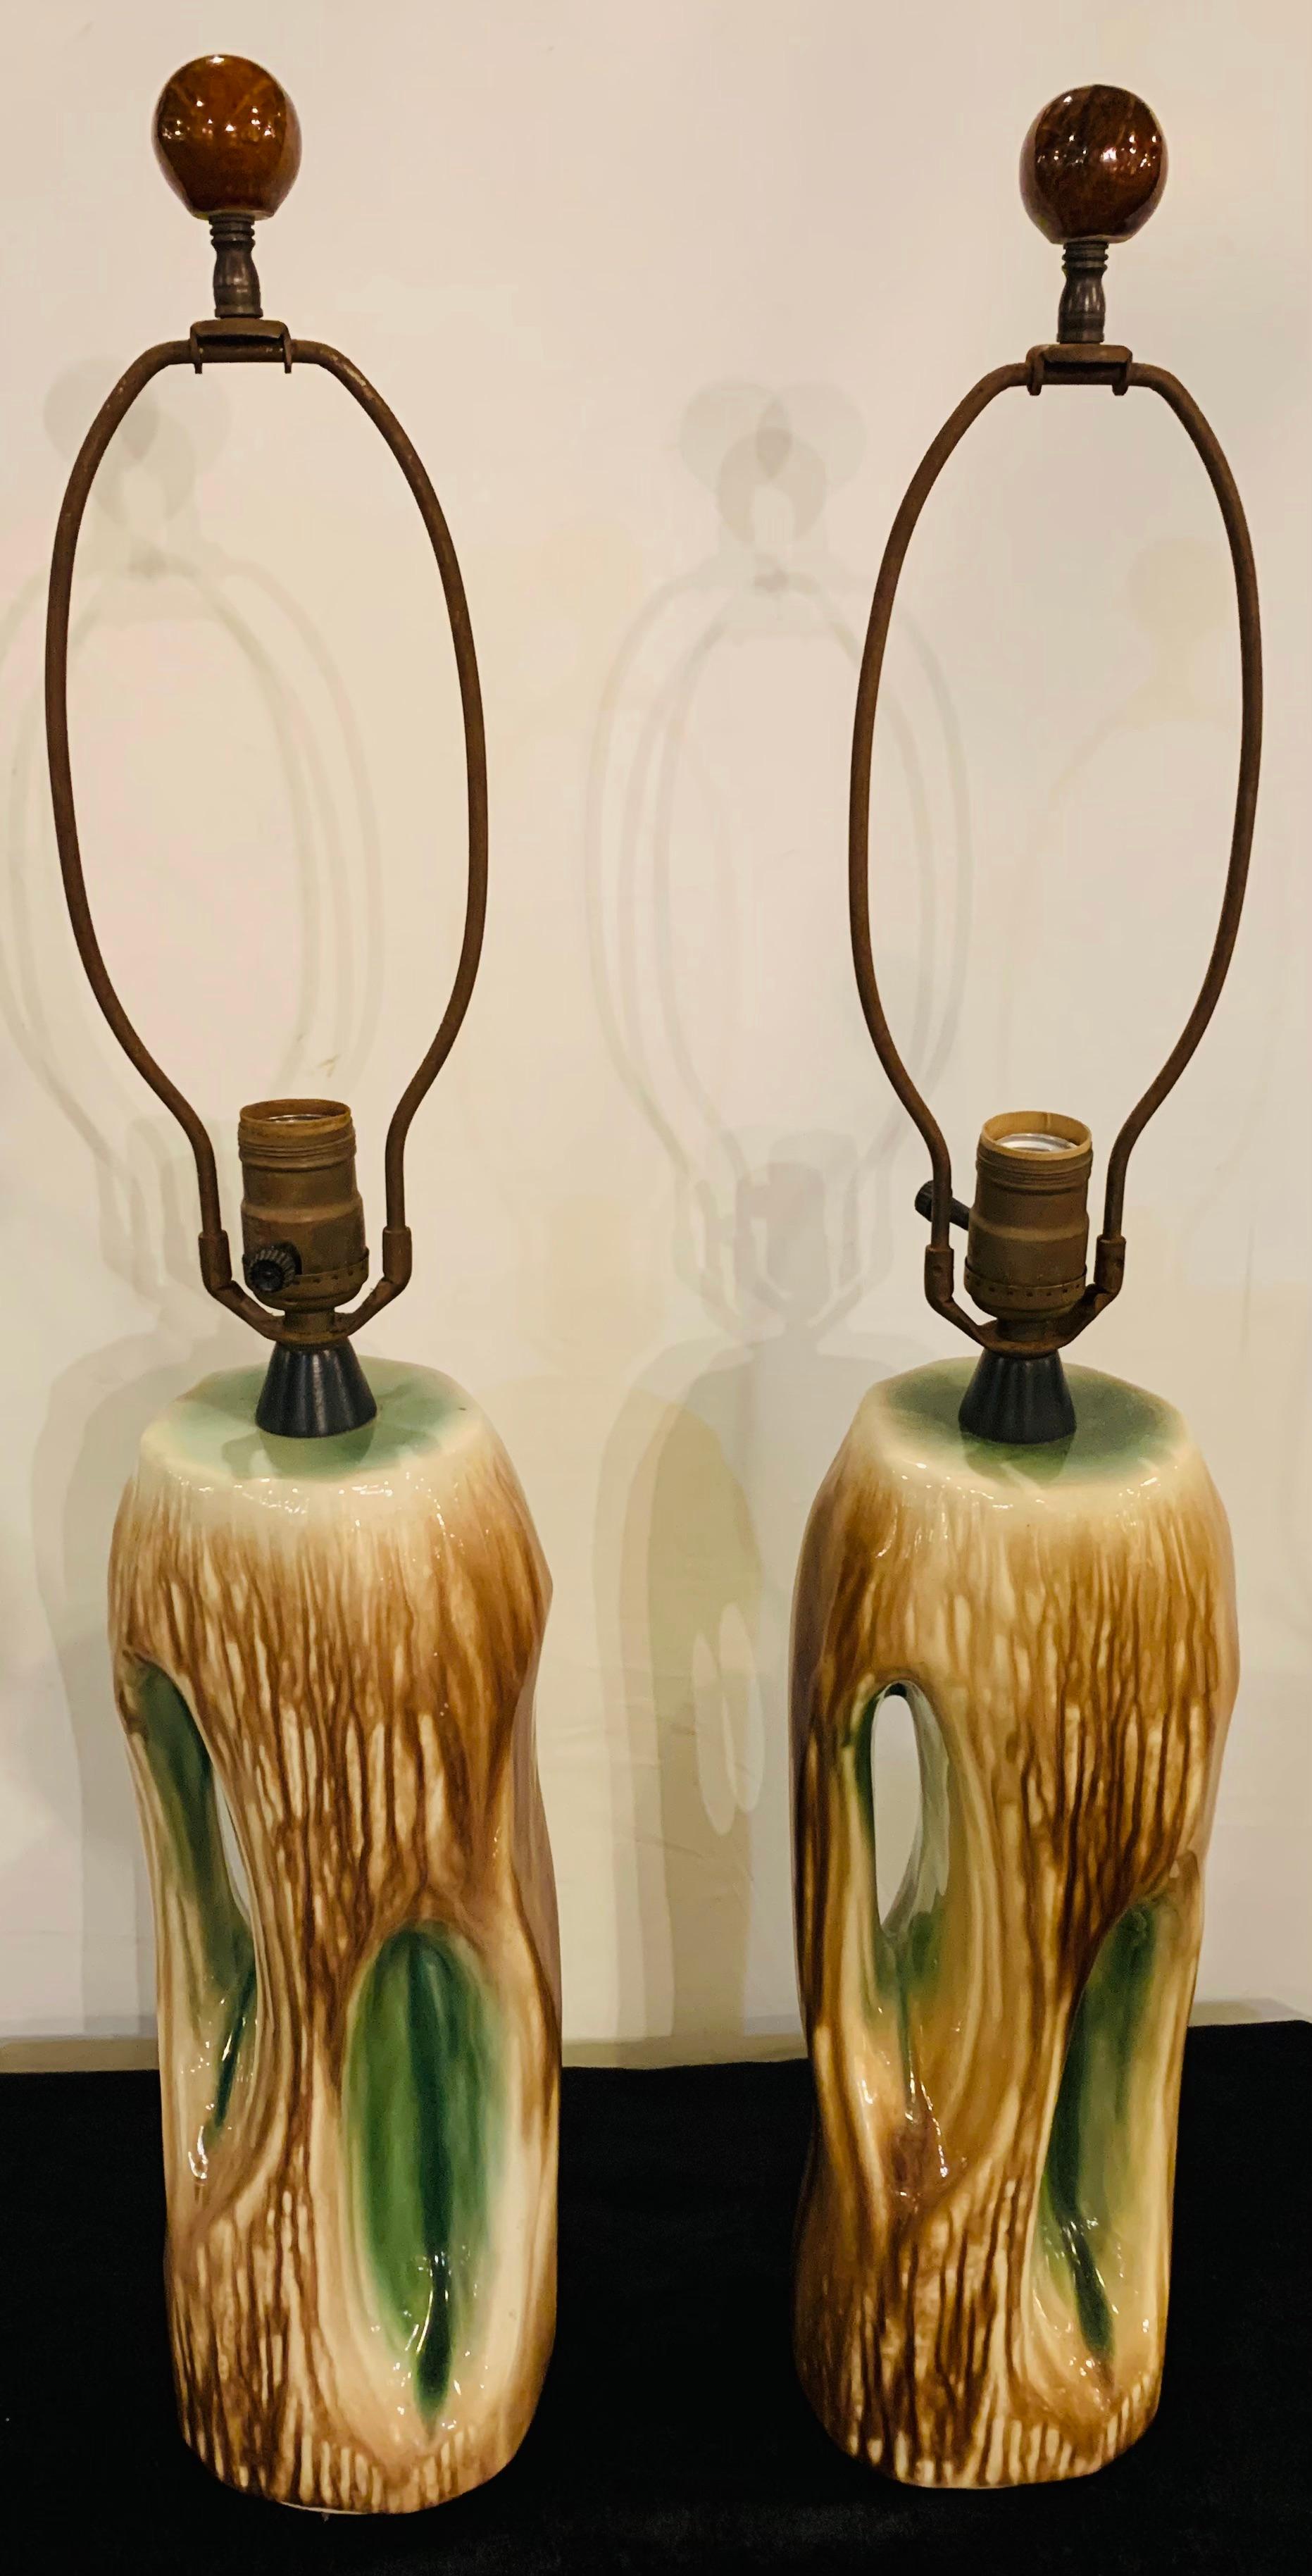 Mid-Century Modern ceramic tree trunk table lamp, a pair

This pair of fine Yasha Heifetz ceramic Mid-Century Modern table lamps features green and brown tones on tree trunk shaped base. The pair of lamps is signed by the designer. This pair is